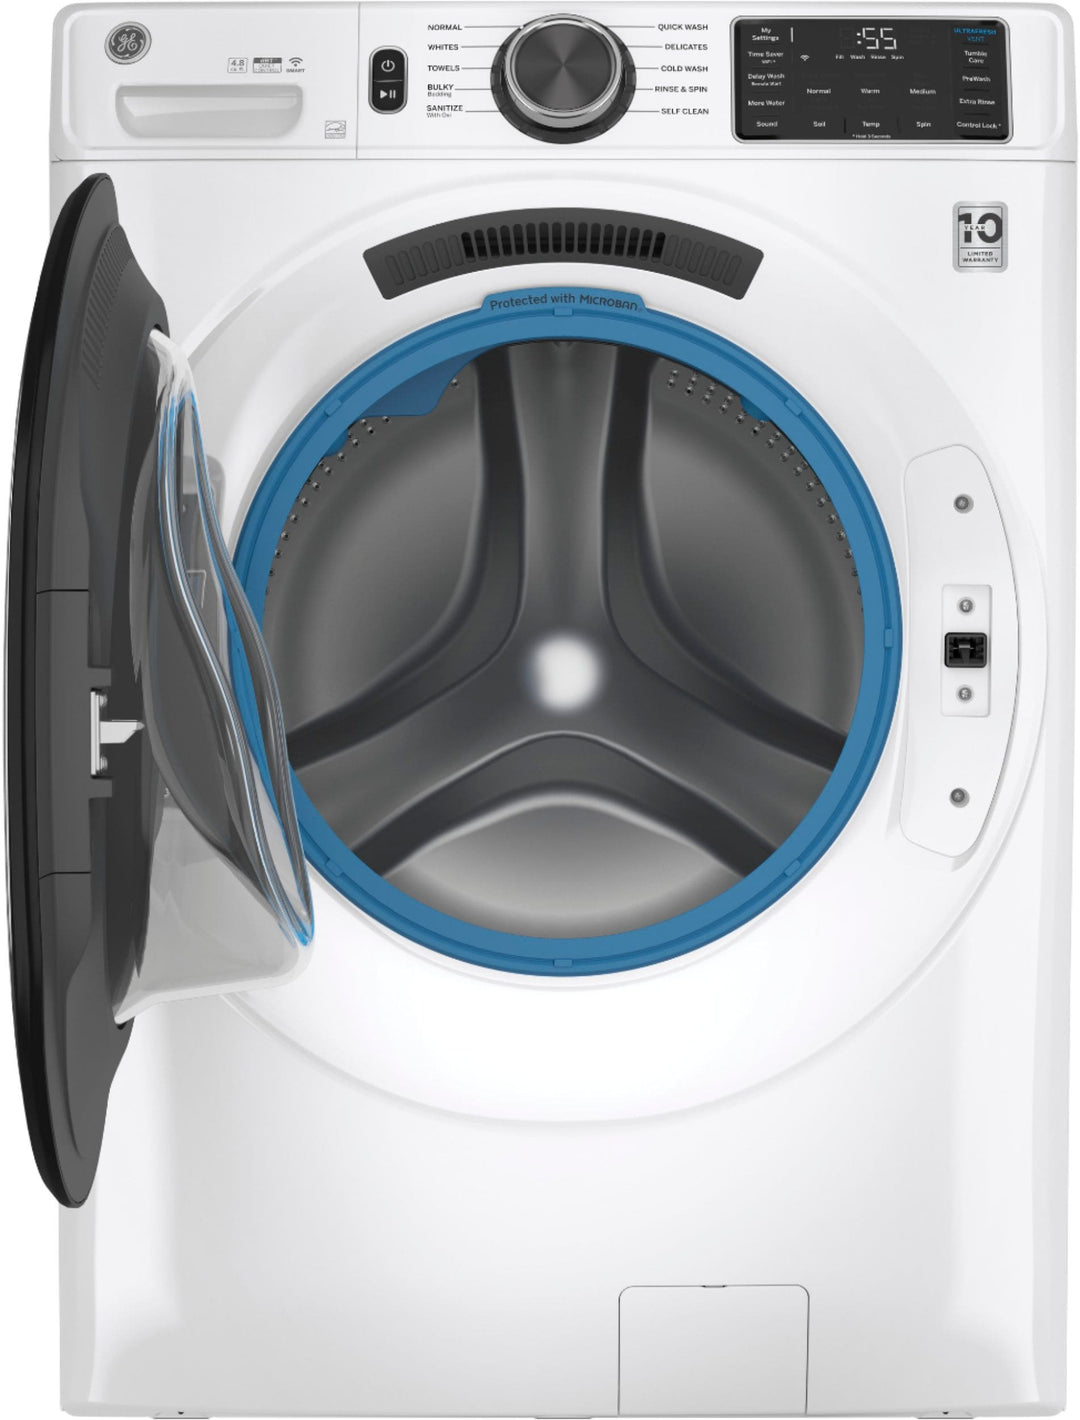 GE - 4.8 CuFt High-Efficiency Stackable Smart Front Load Washer w/UltraFresh Vent System & Microban Antimicrobial Technology - White on white_2